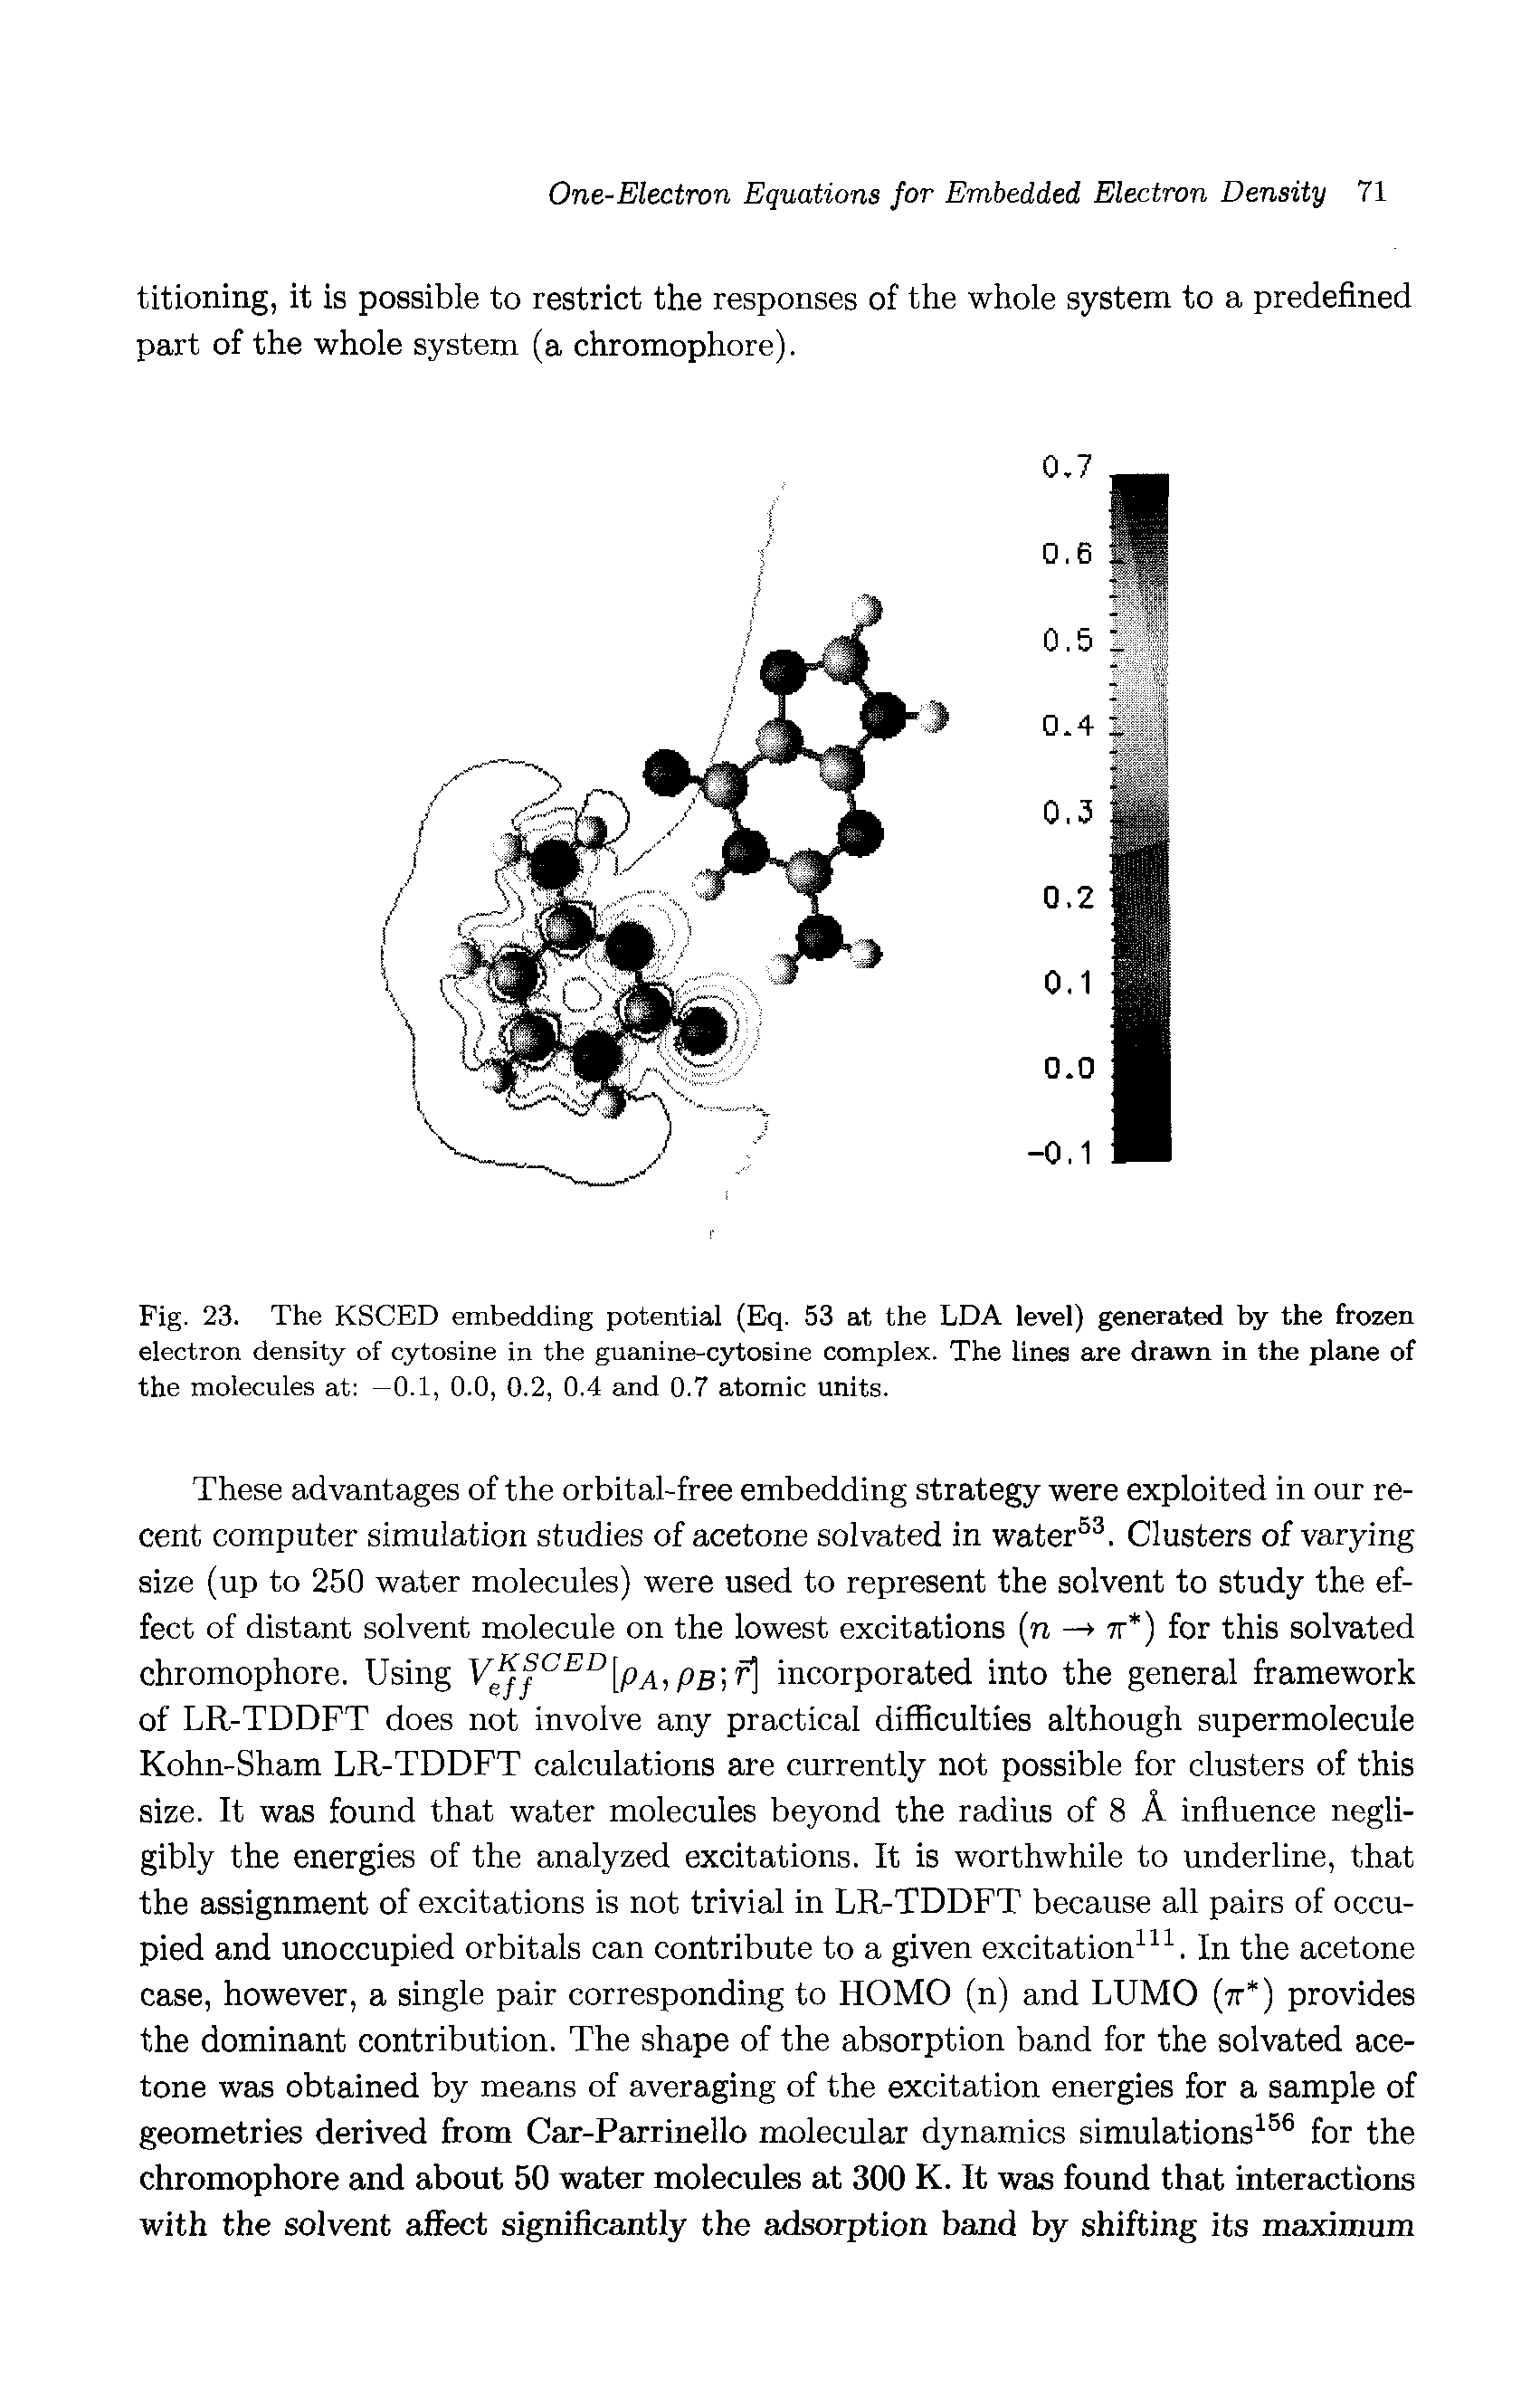 Fig. 23. The KSCED embedding potential (Eq. 53 at the LDA level) generated by the frozen electron density of cytosine in the guanine-cytosine complex. The lines are drawn in the plane of the molecules at —0.1, 0.0, 0.2, 0.4 and 0.7 atomic units.